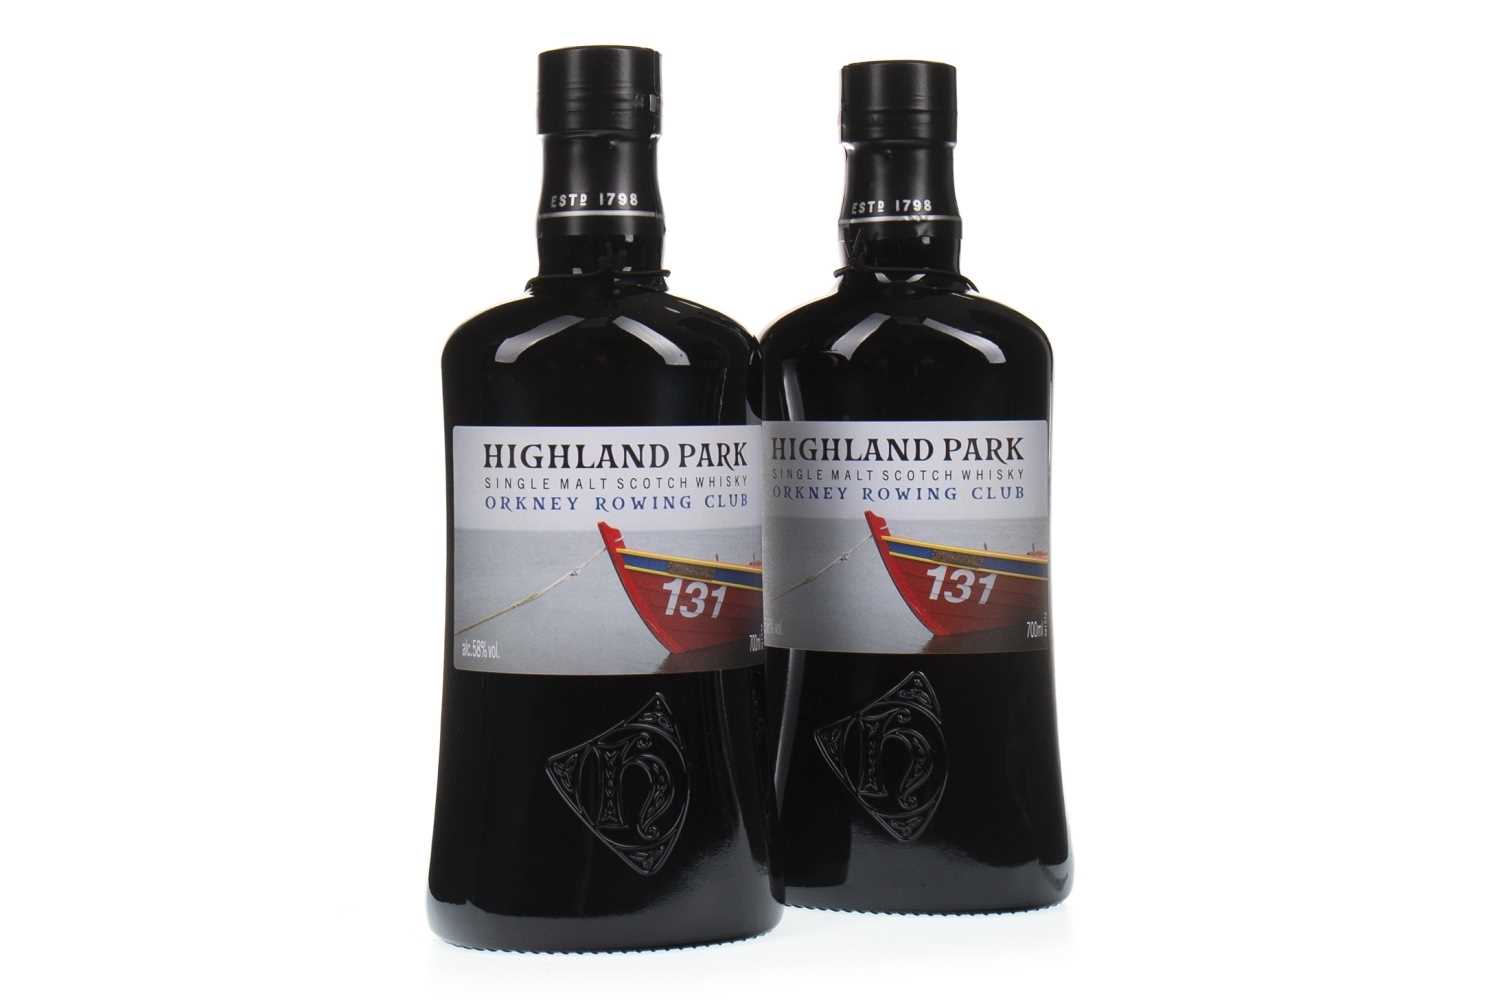 Lot 323 - TWO BOTTLES OF HIGHLAND PARK ORKNEY ROWING CLUB